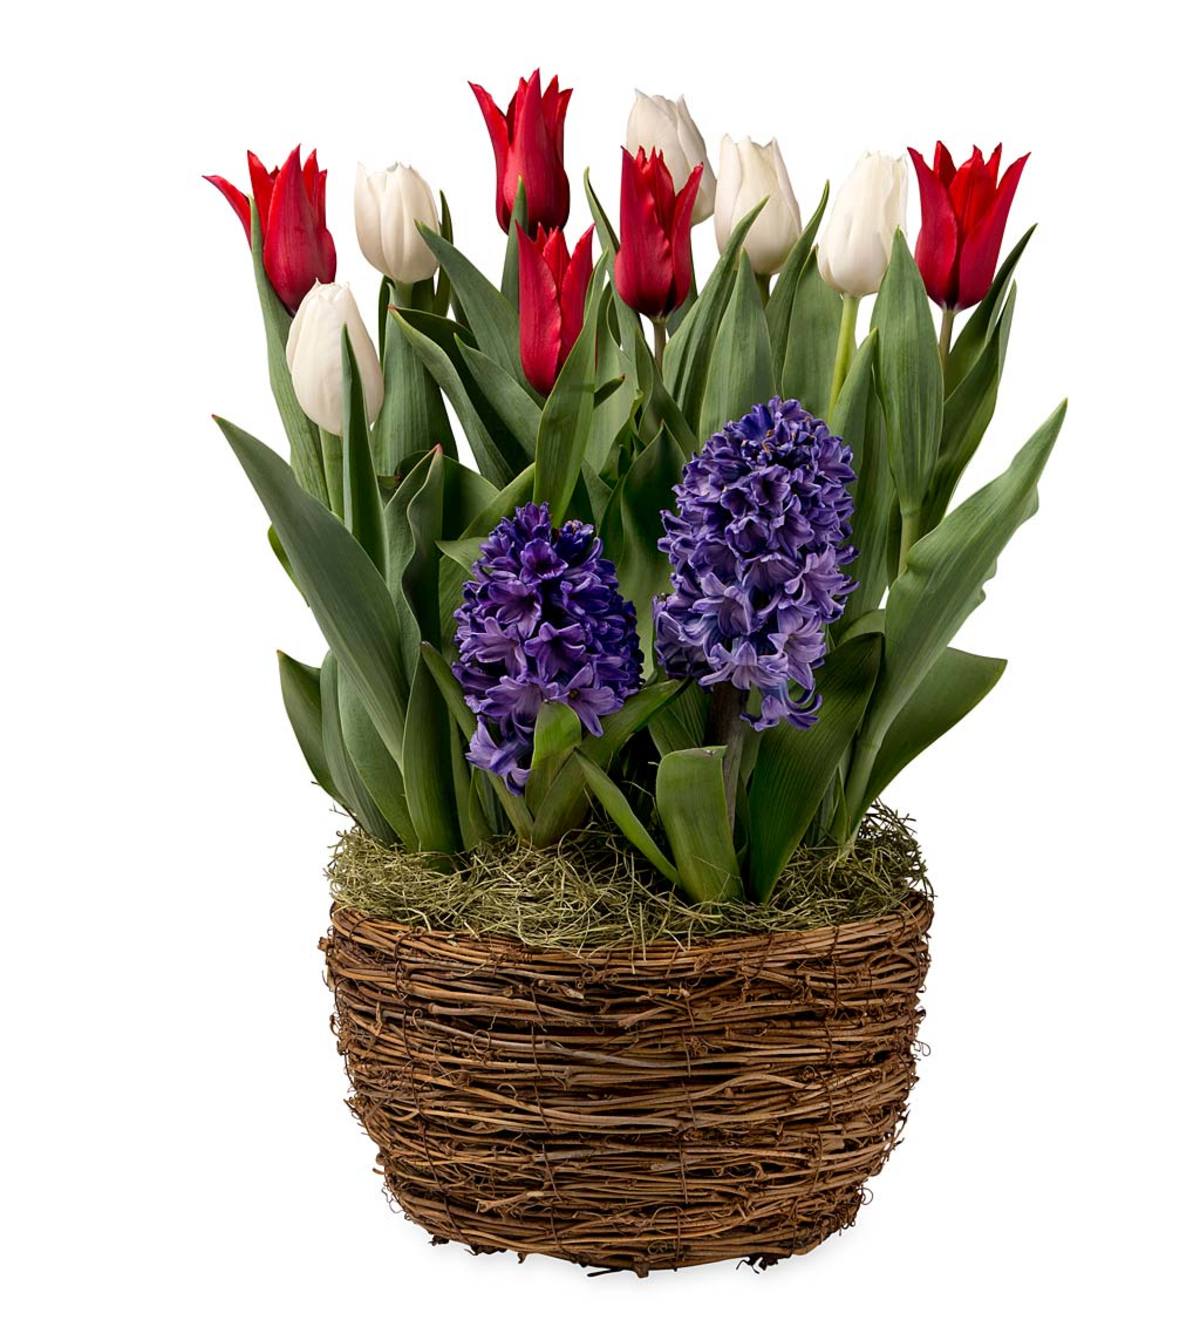 Tulip and Hyacinth Bulb Garden | Wind and Weather